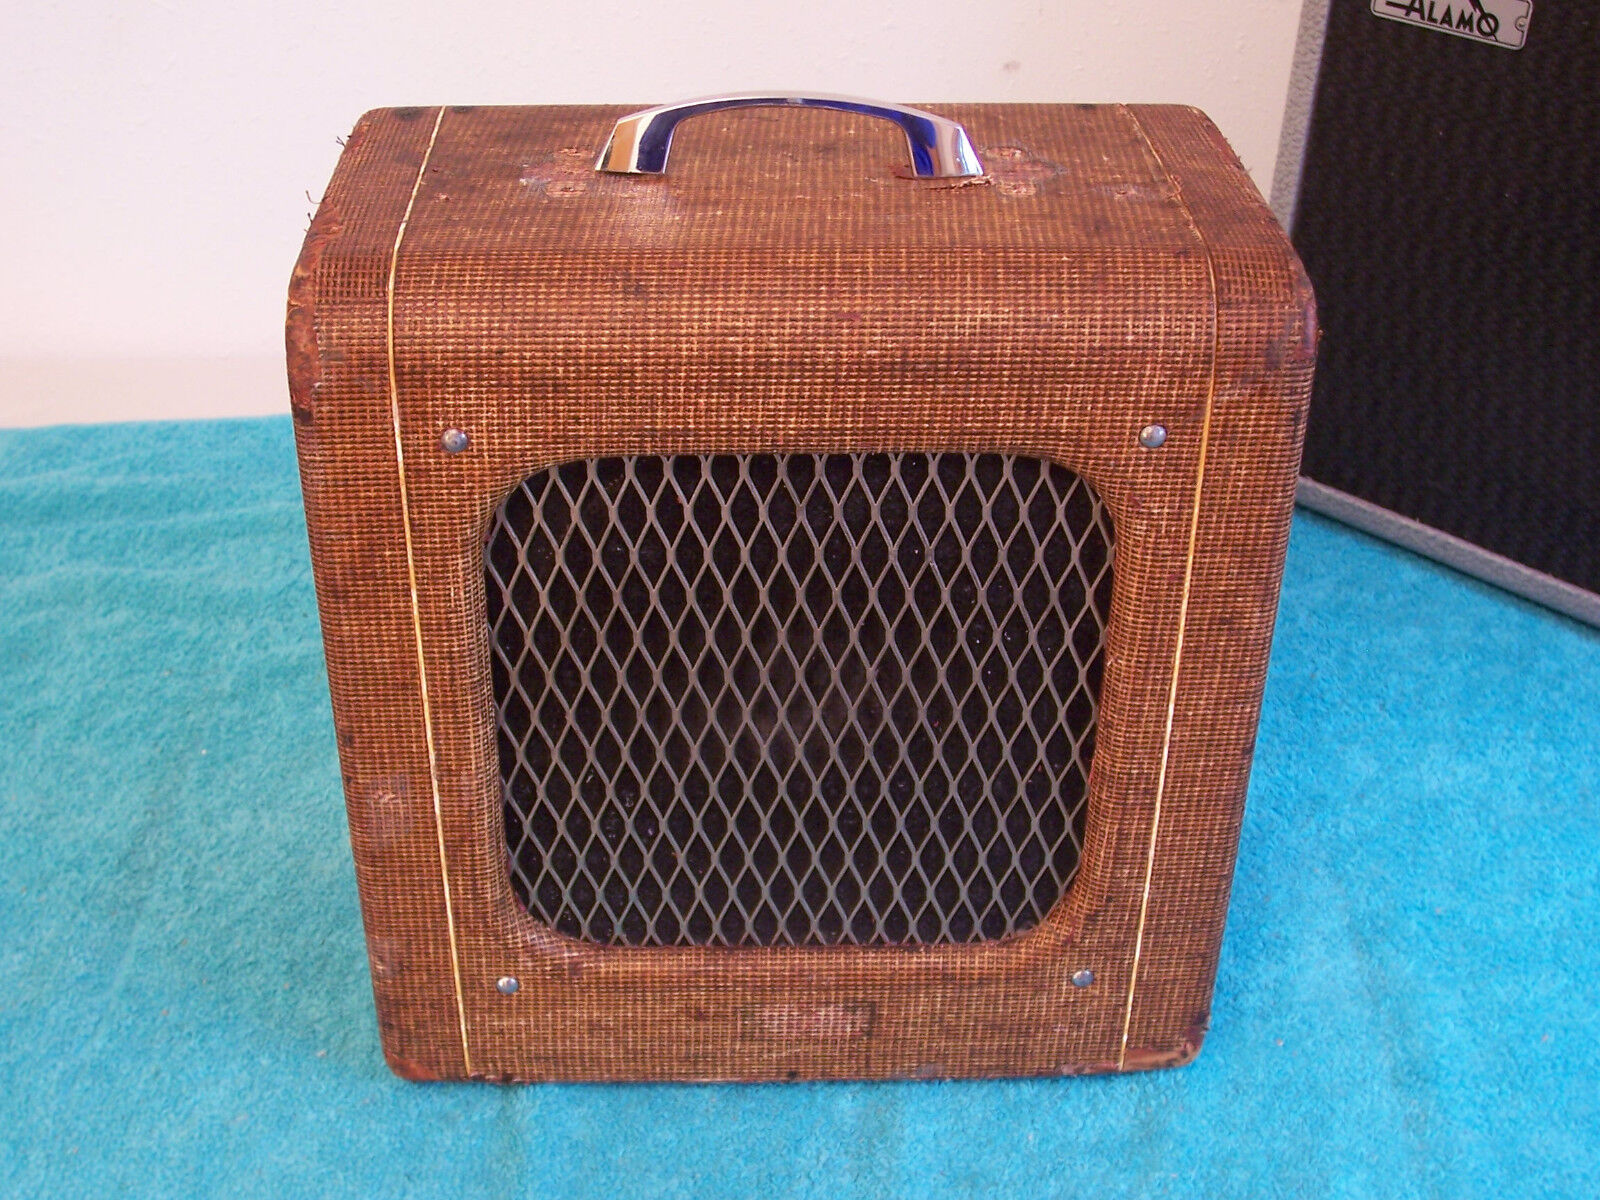 1954 Selmer amp Valco made tube amplifier  G. Cond.  Spectator  working tweed